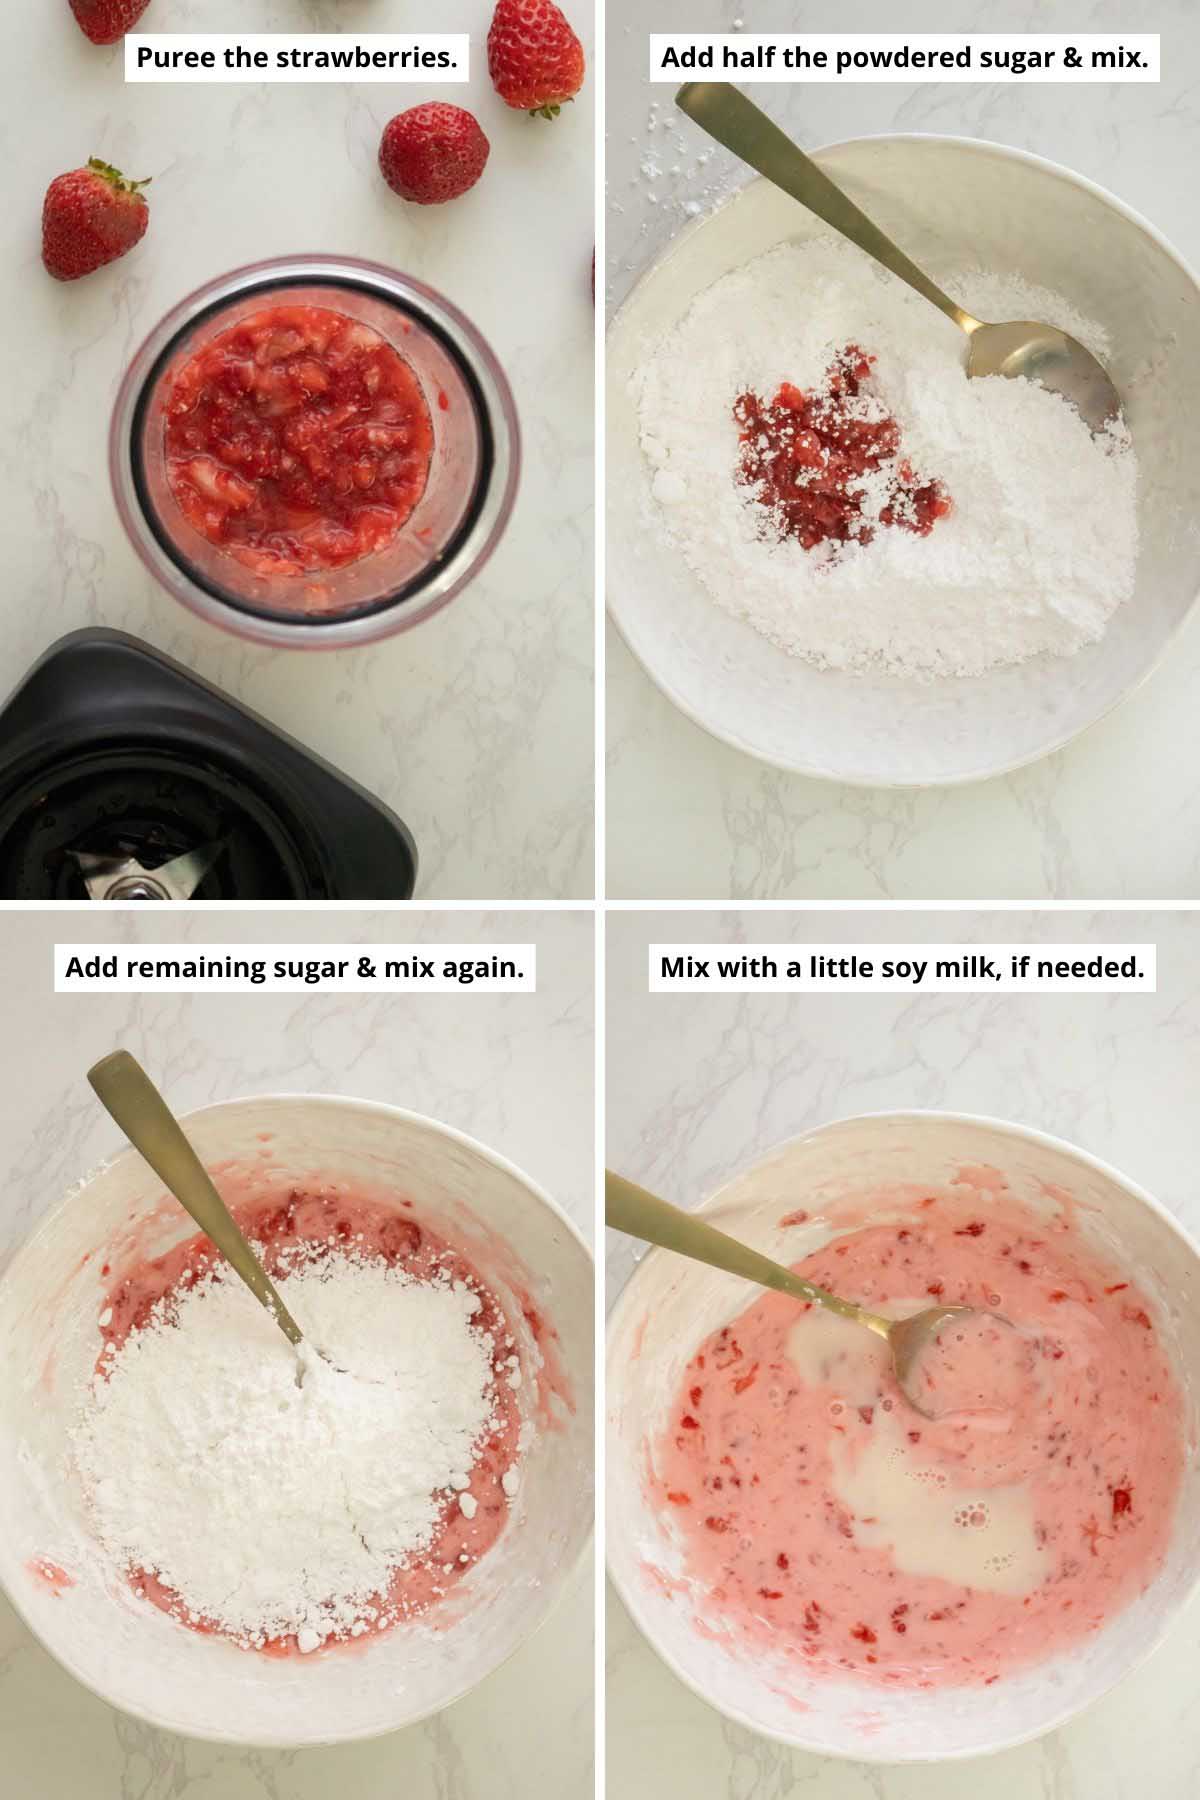 image collage showing strawberry puree in the blender and in the bowl with powdered sugar, adding the rest of the sugar to the glaze and adding soy milk to the strawberry glaze